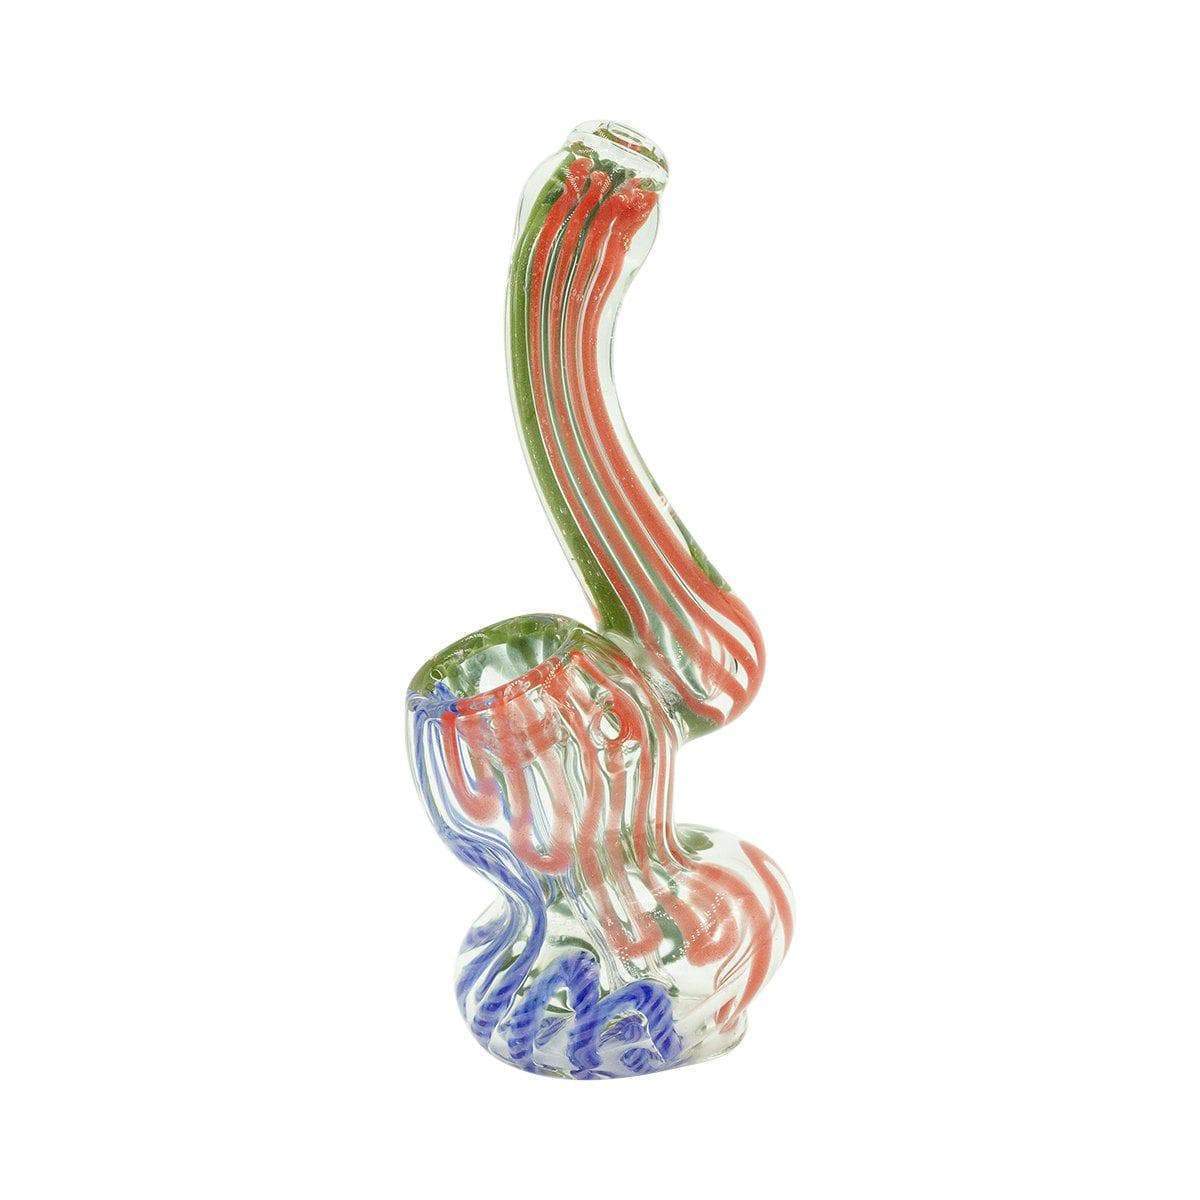 4-inch mini glass bubbler smoking device with twisting design genie-in-a-bottle shape in fun clean swirling colors